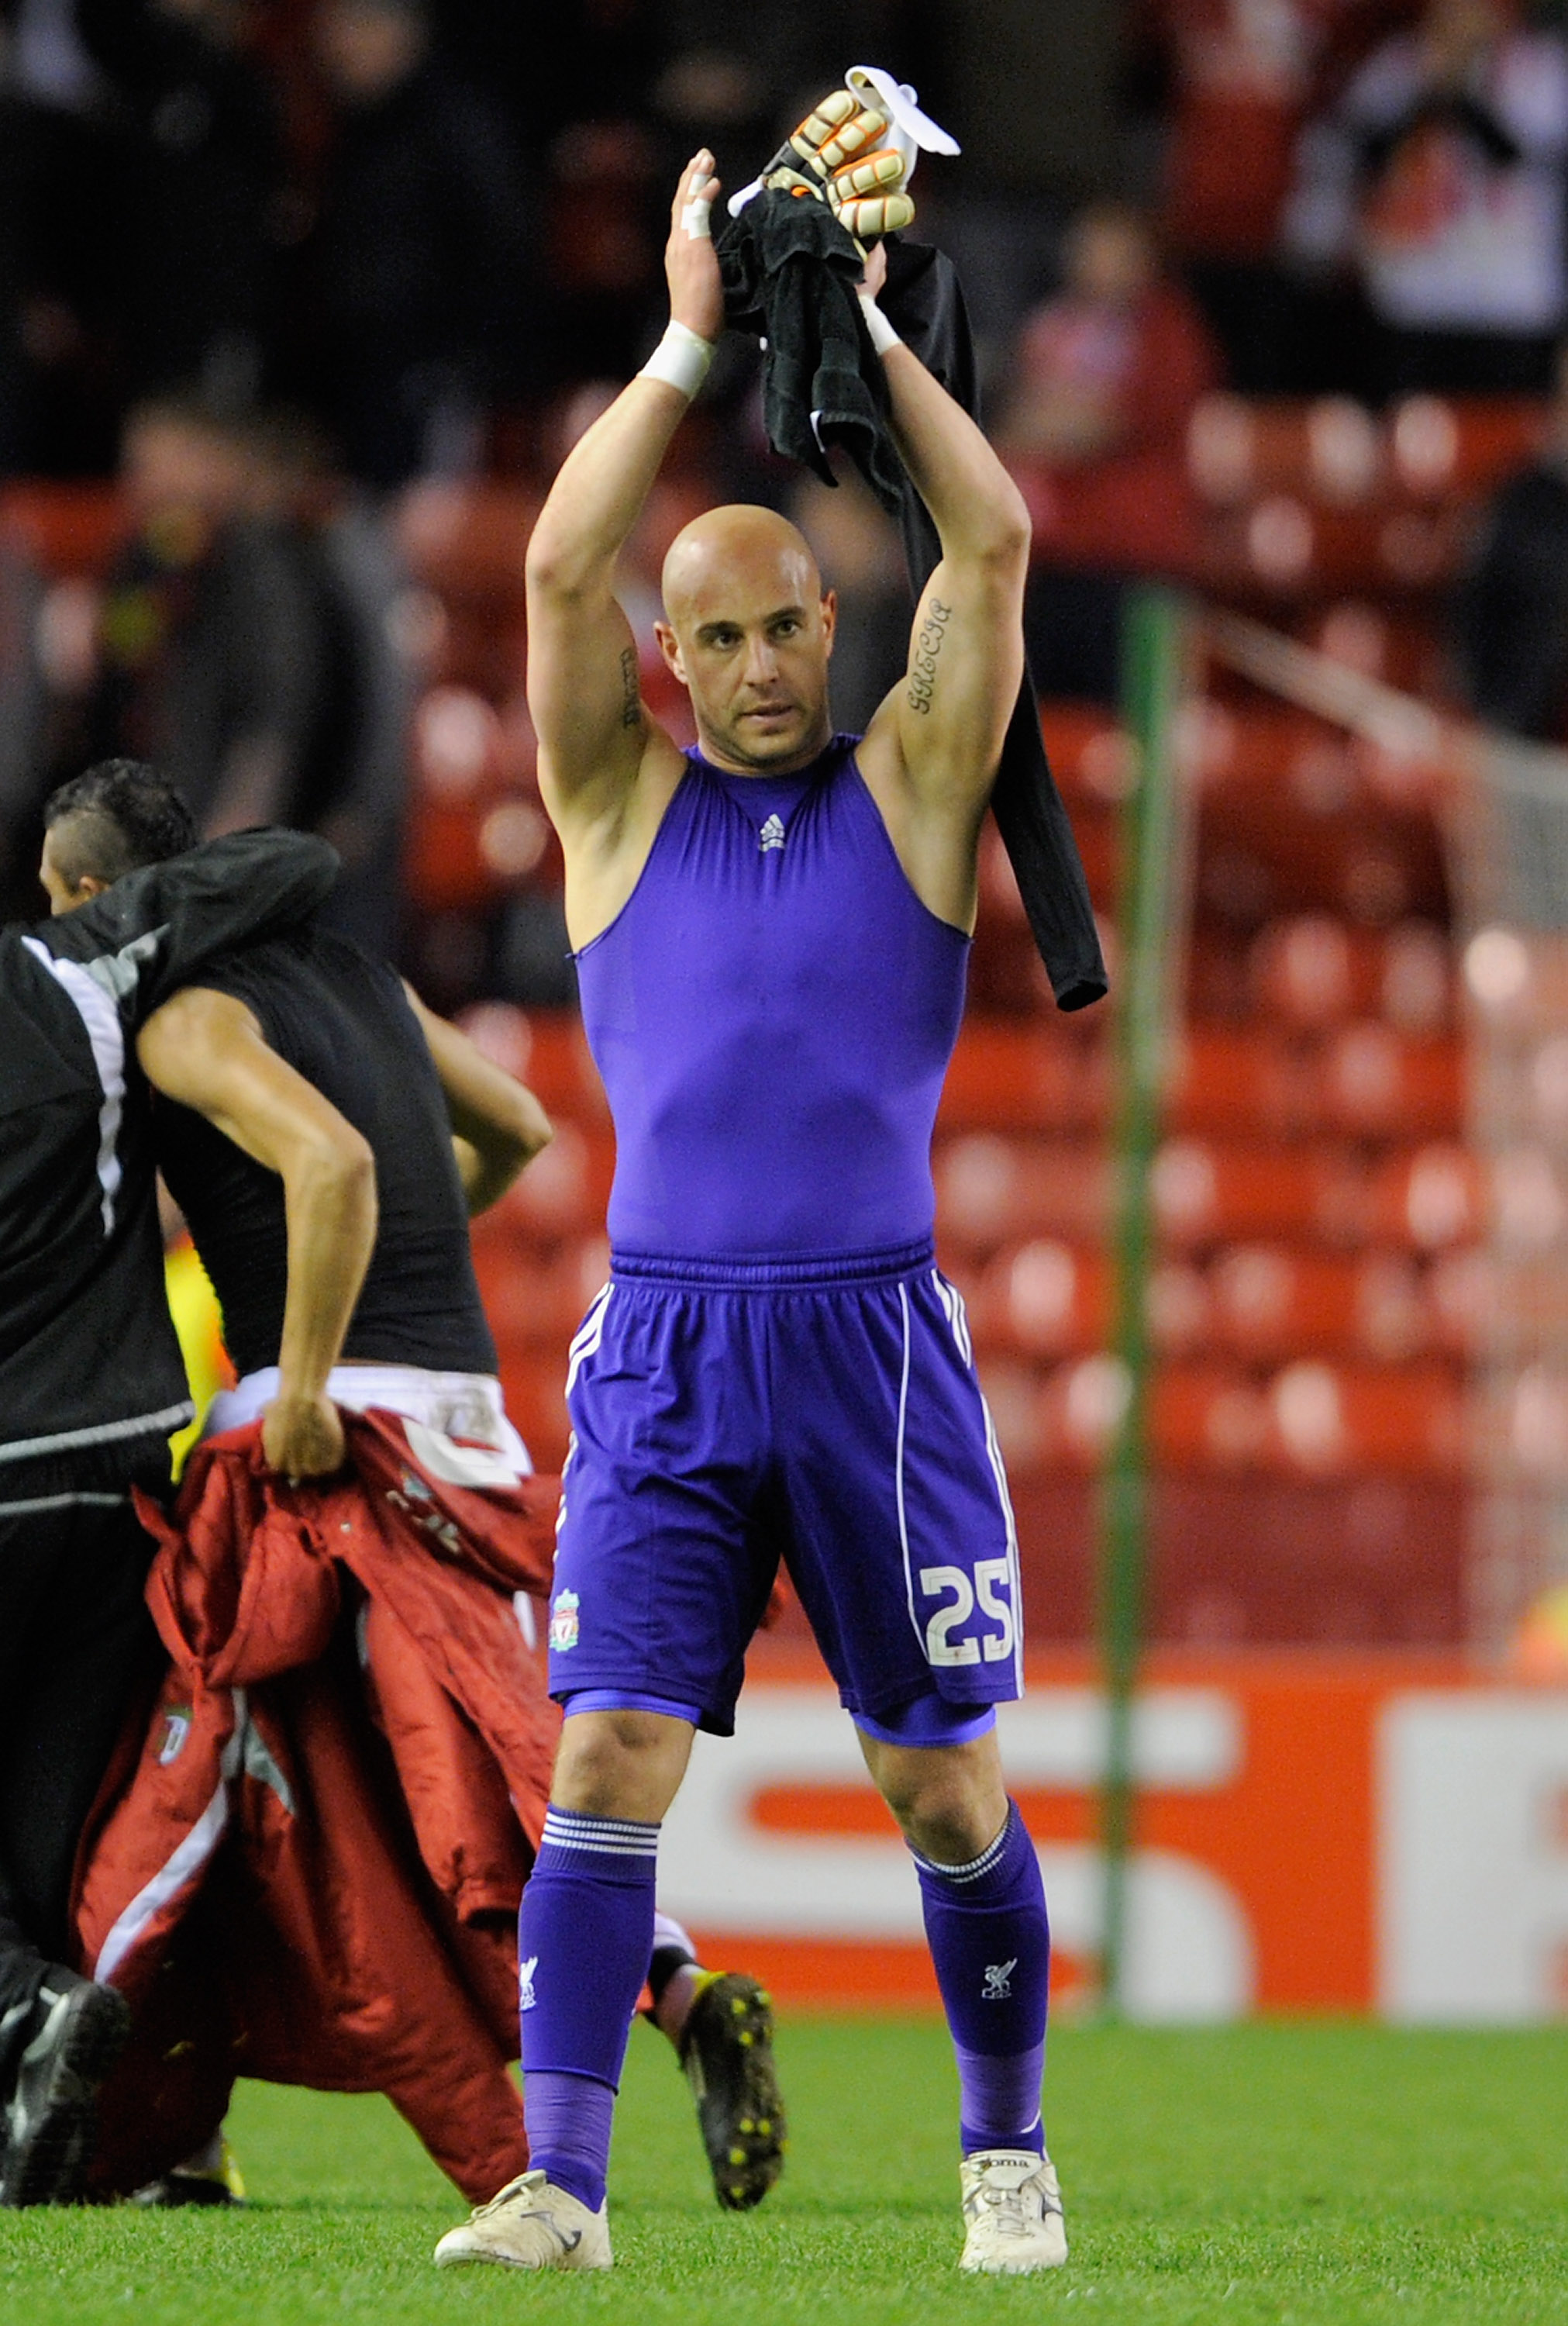 LIVERPOOL, ENGLAND - MARCH 17:  Pepe Reina of Liverpool applauds the fans after defeat in the UEFA Europa League Round of 16 second leg match between Liverpool and SC Braga at Anfield on March 17, 2011 in Liverpool, England.  (Photo by Michael Regan/Getty